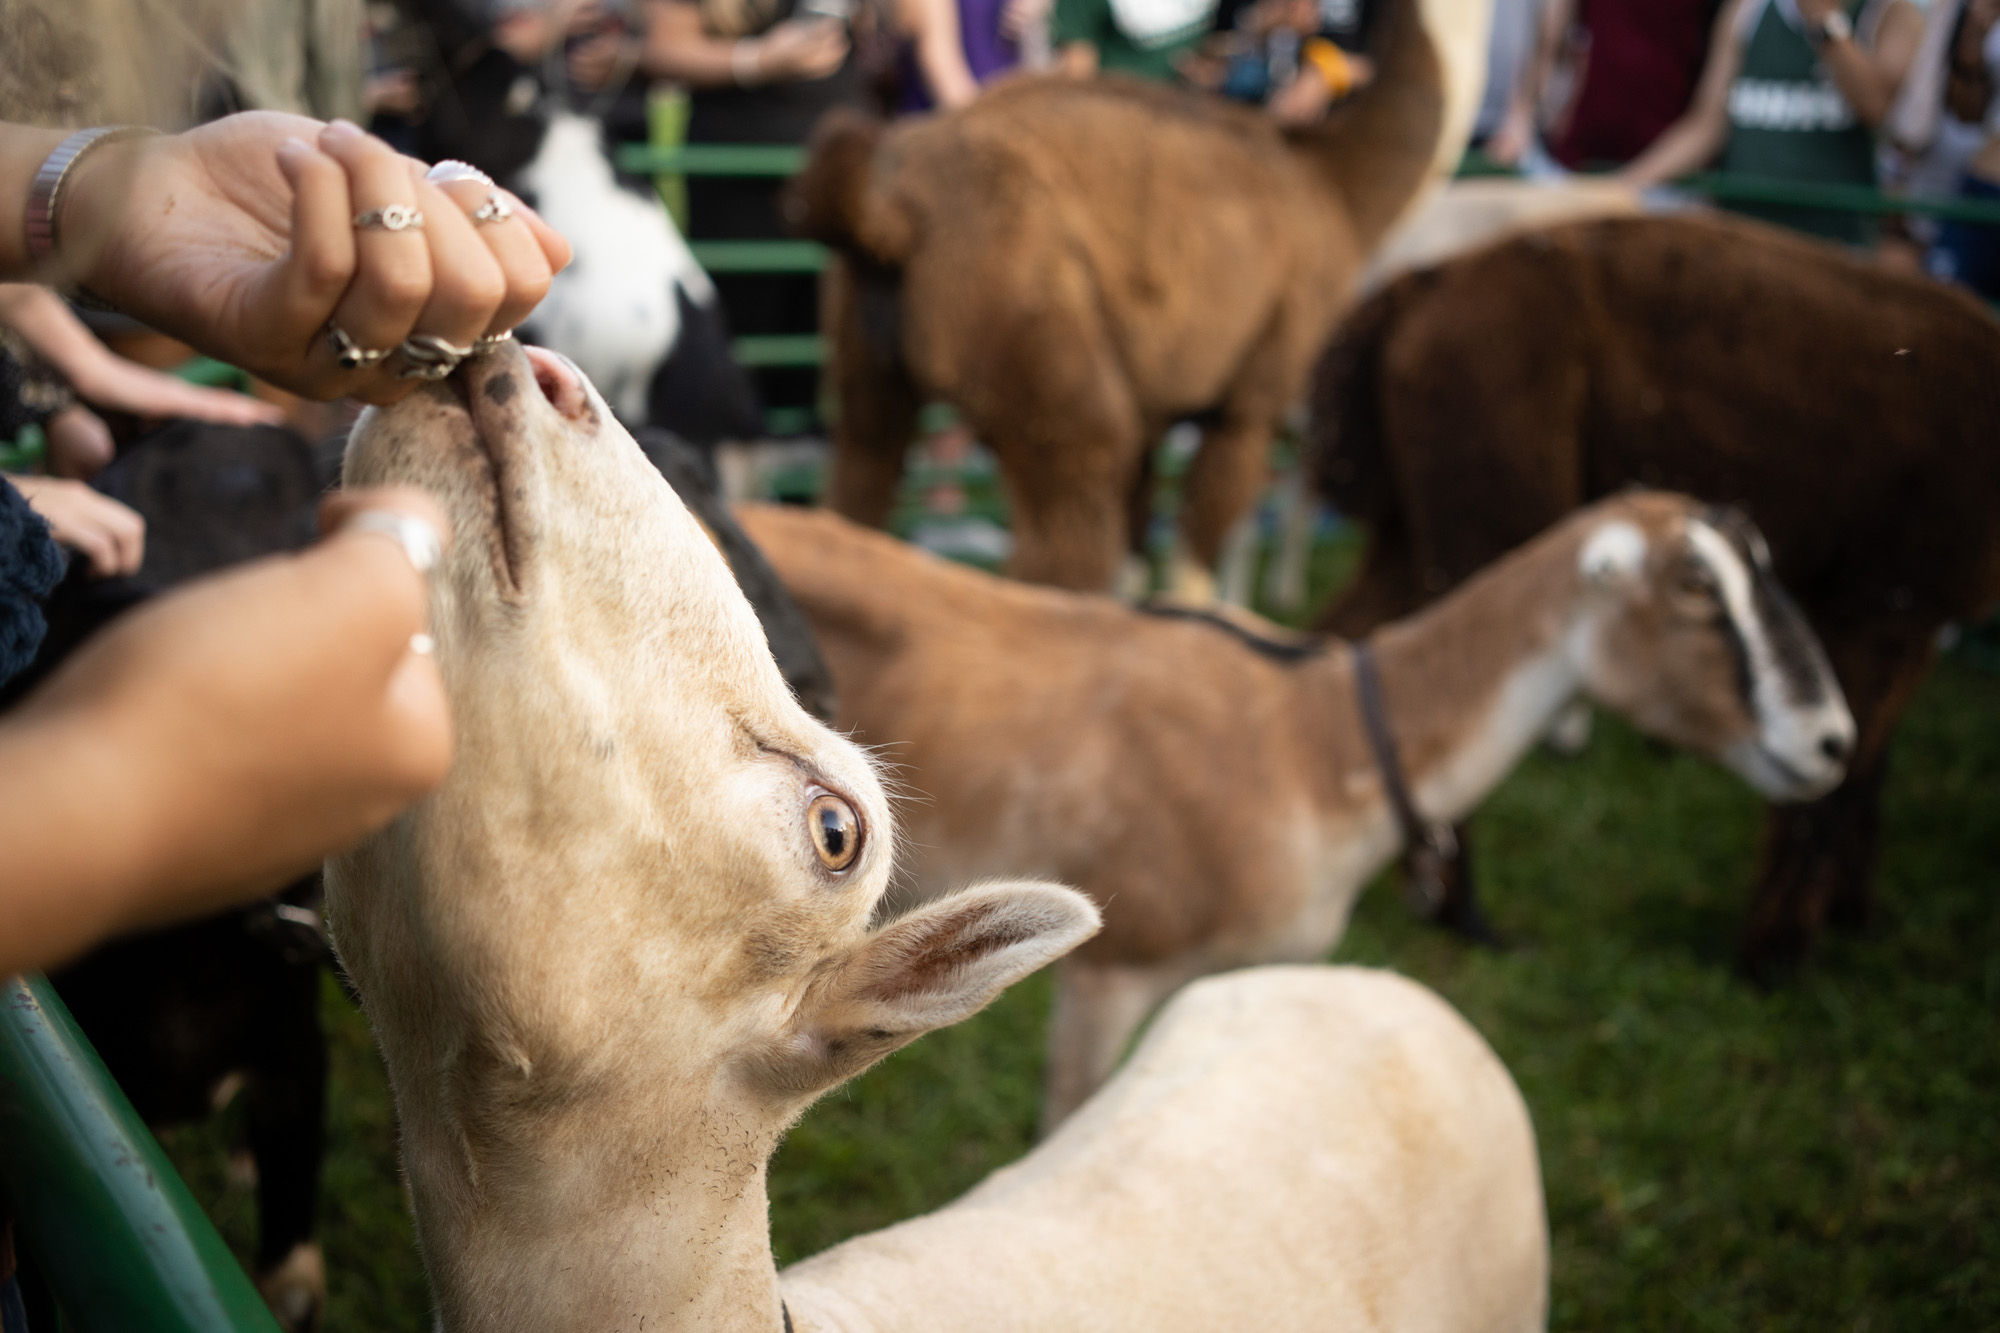 Students feed and pet goats at a petting zoo that was held on South Green during Welcome Week 2021